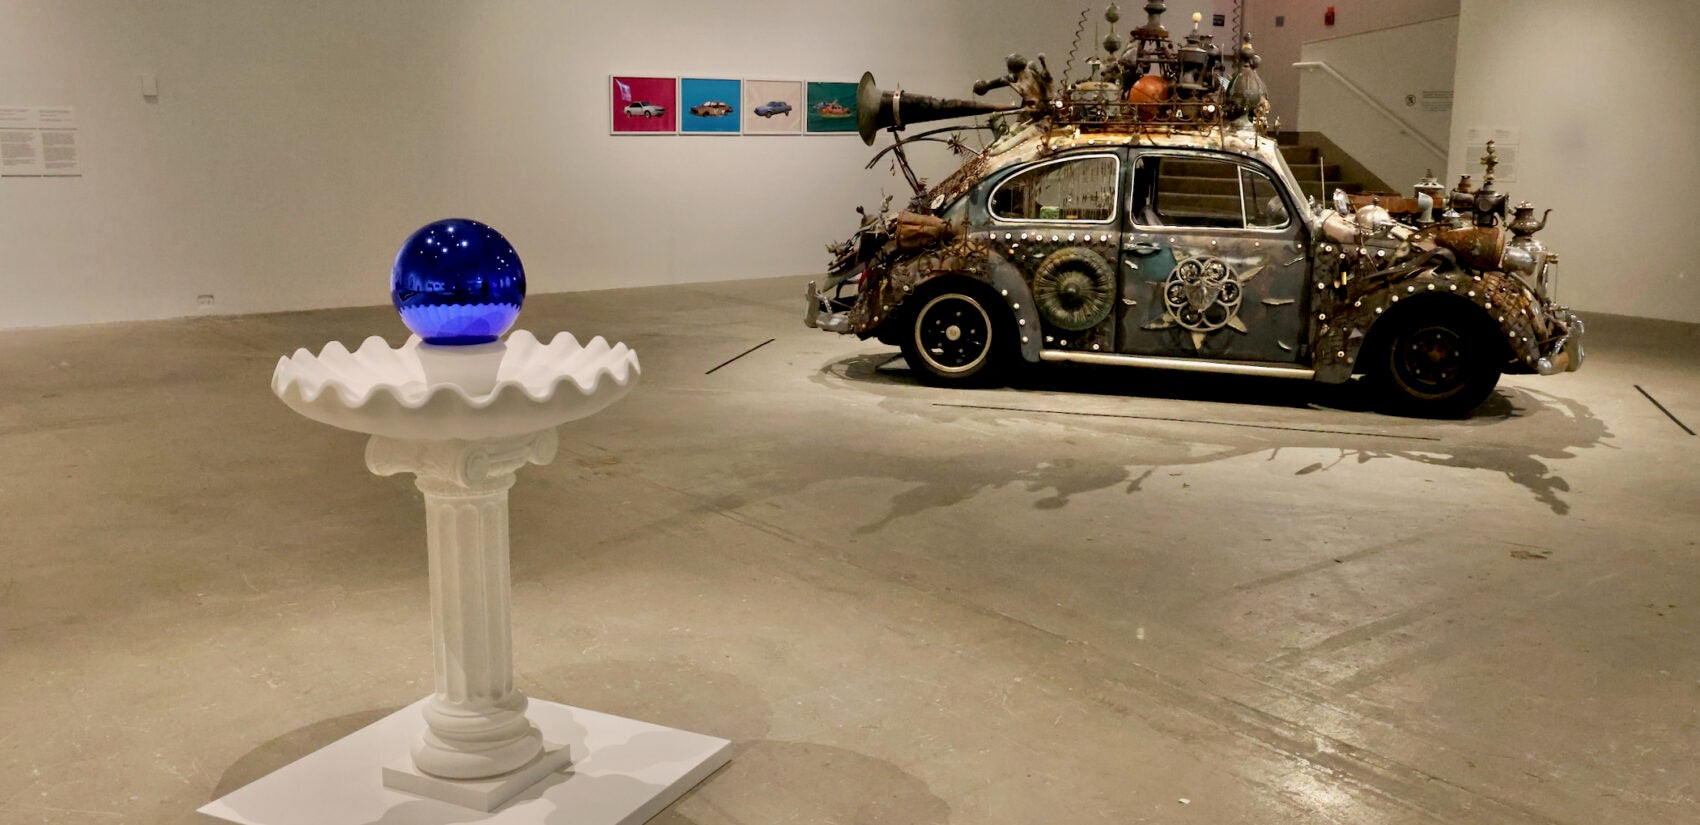 ''Gazing Ball (Birdbath)'' by Jeff Koons is juxtaposed with Clarke Bedford's ''Art Car (Volkswagen)'' at the Institute of Contemporary Art exhibit exploring the history and impact of yard art. (Emma Lee/WHYY)